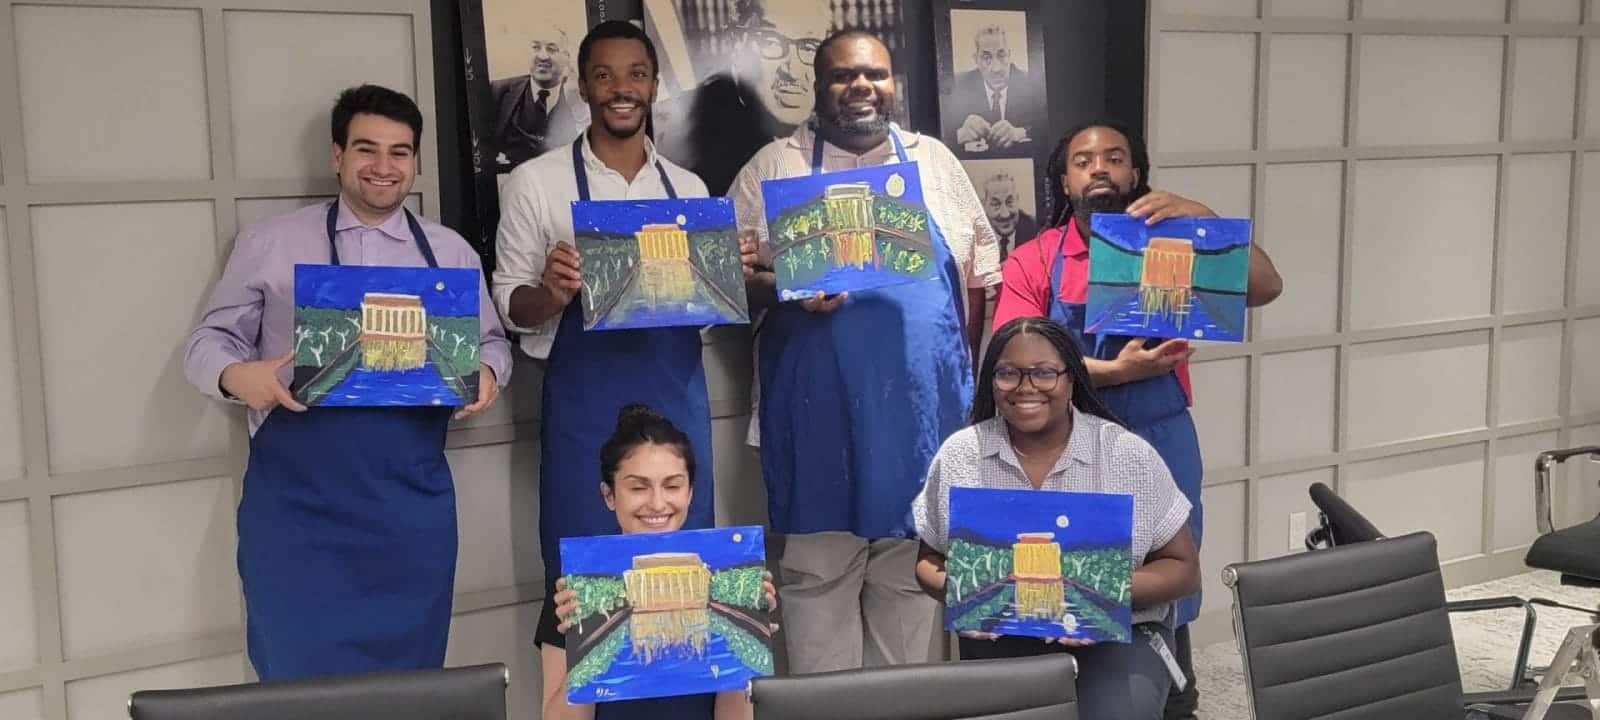 A group of people participating in a paint and sip event in an office.